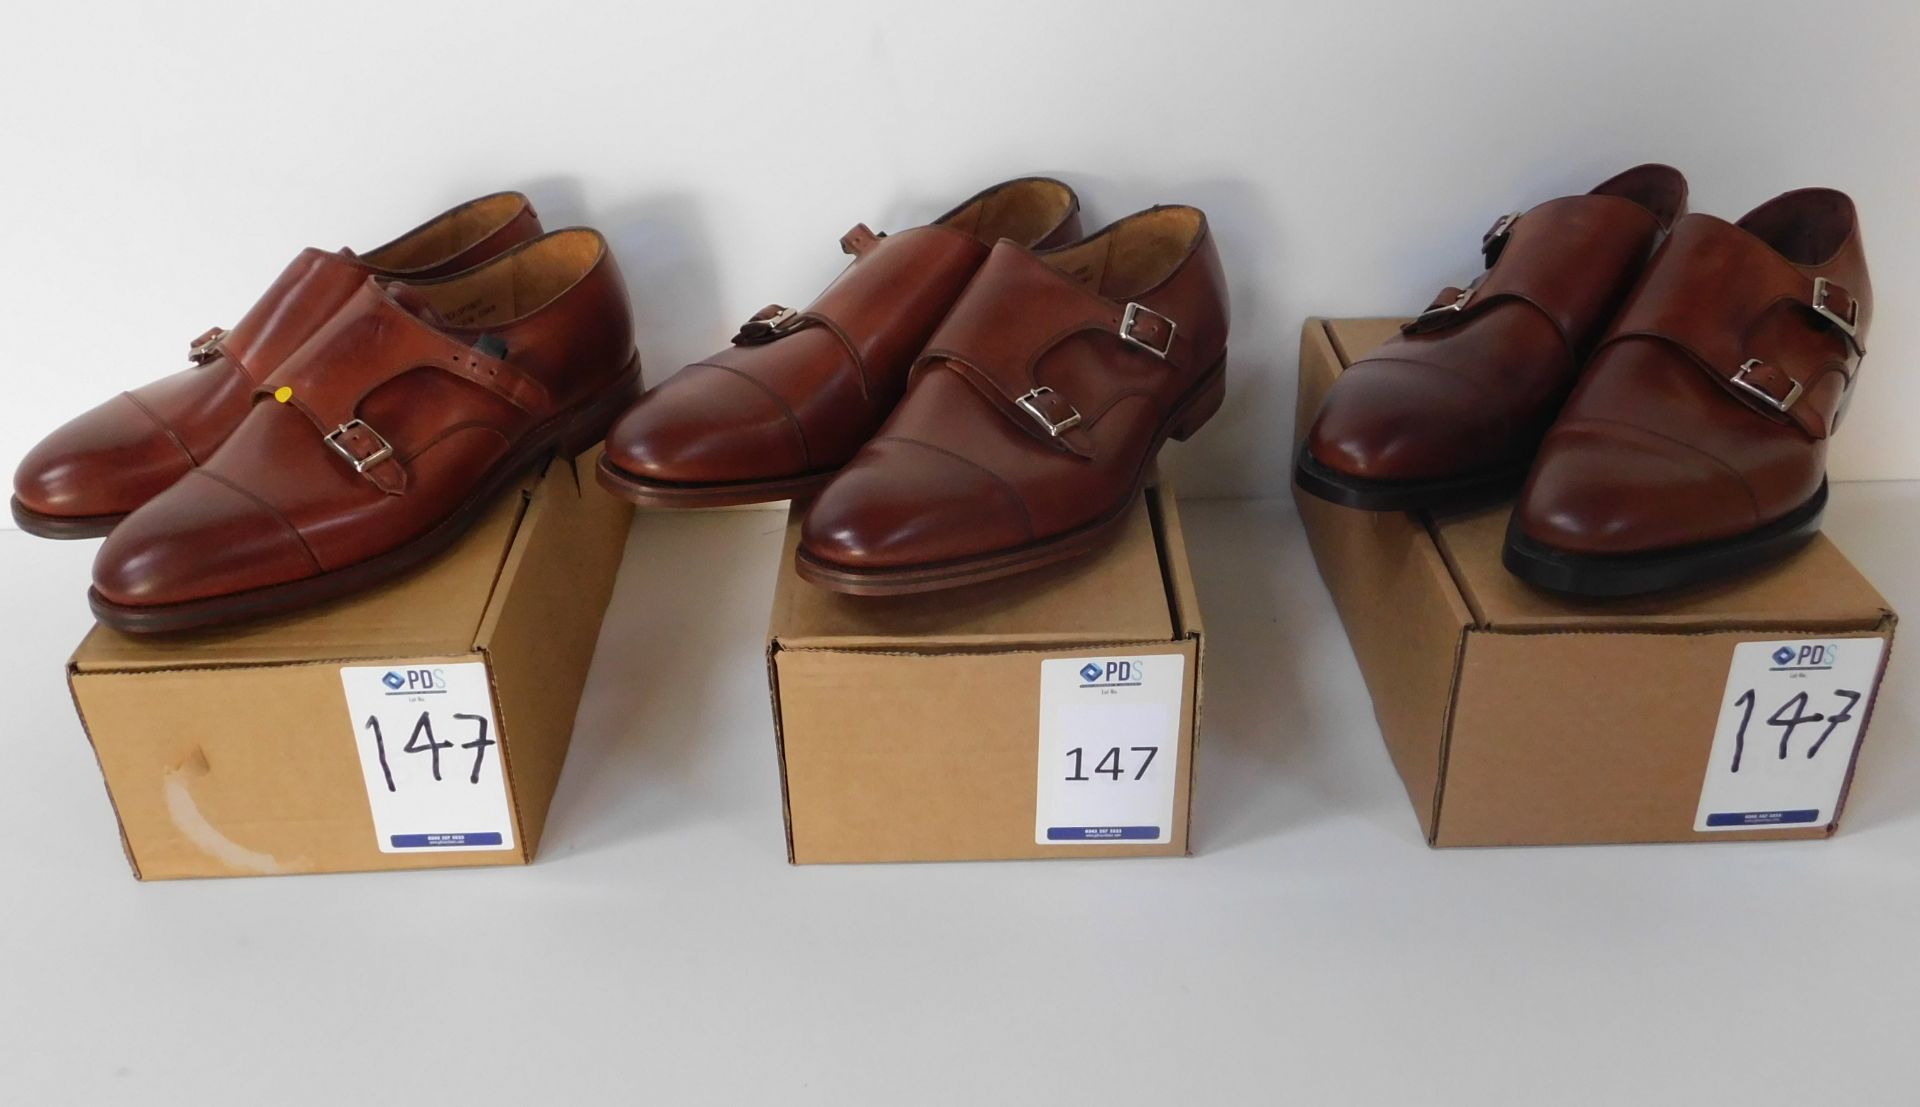 2 Pairs of Alfred Sargent Double Buckle Monk CAP Size 11.5 Alfred & Sargent Autumn Brown Double